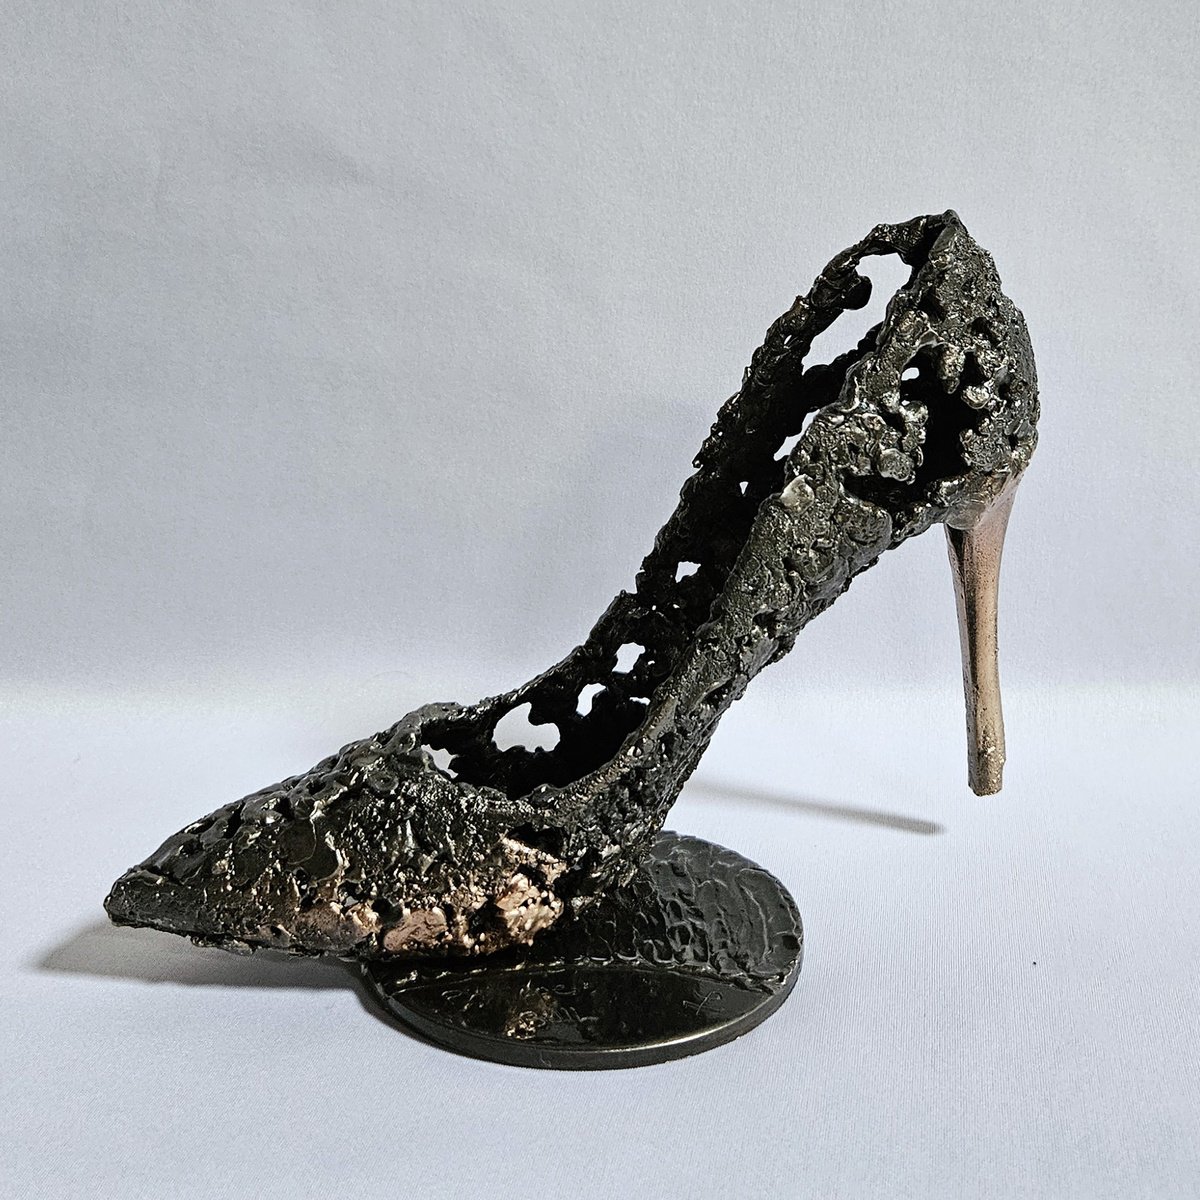 Stiletto heel shoe 91-23 by Philippe Buil